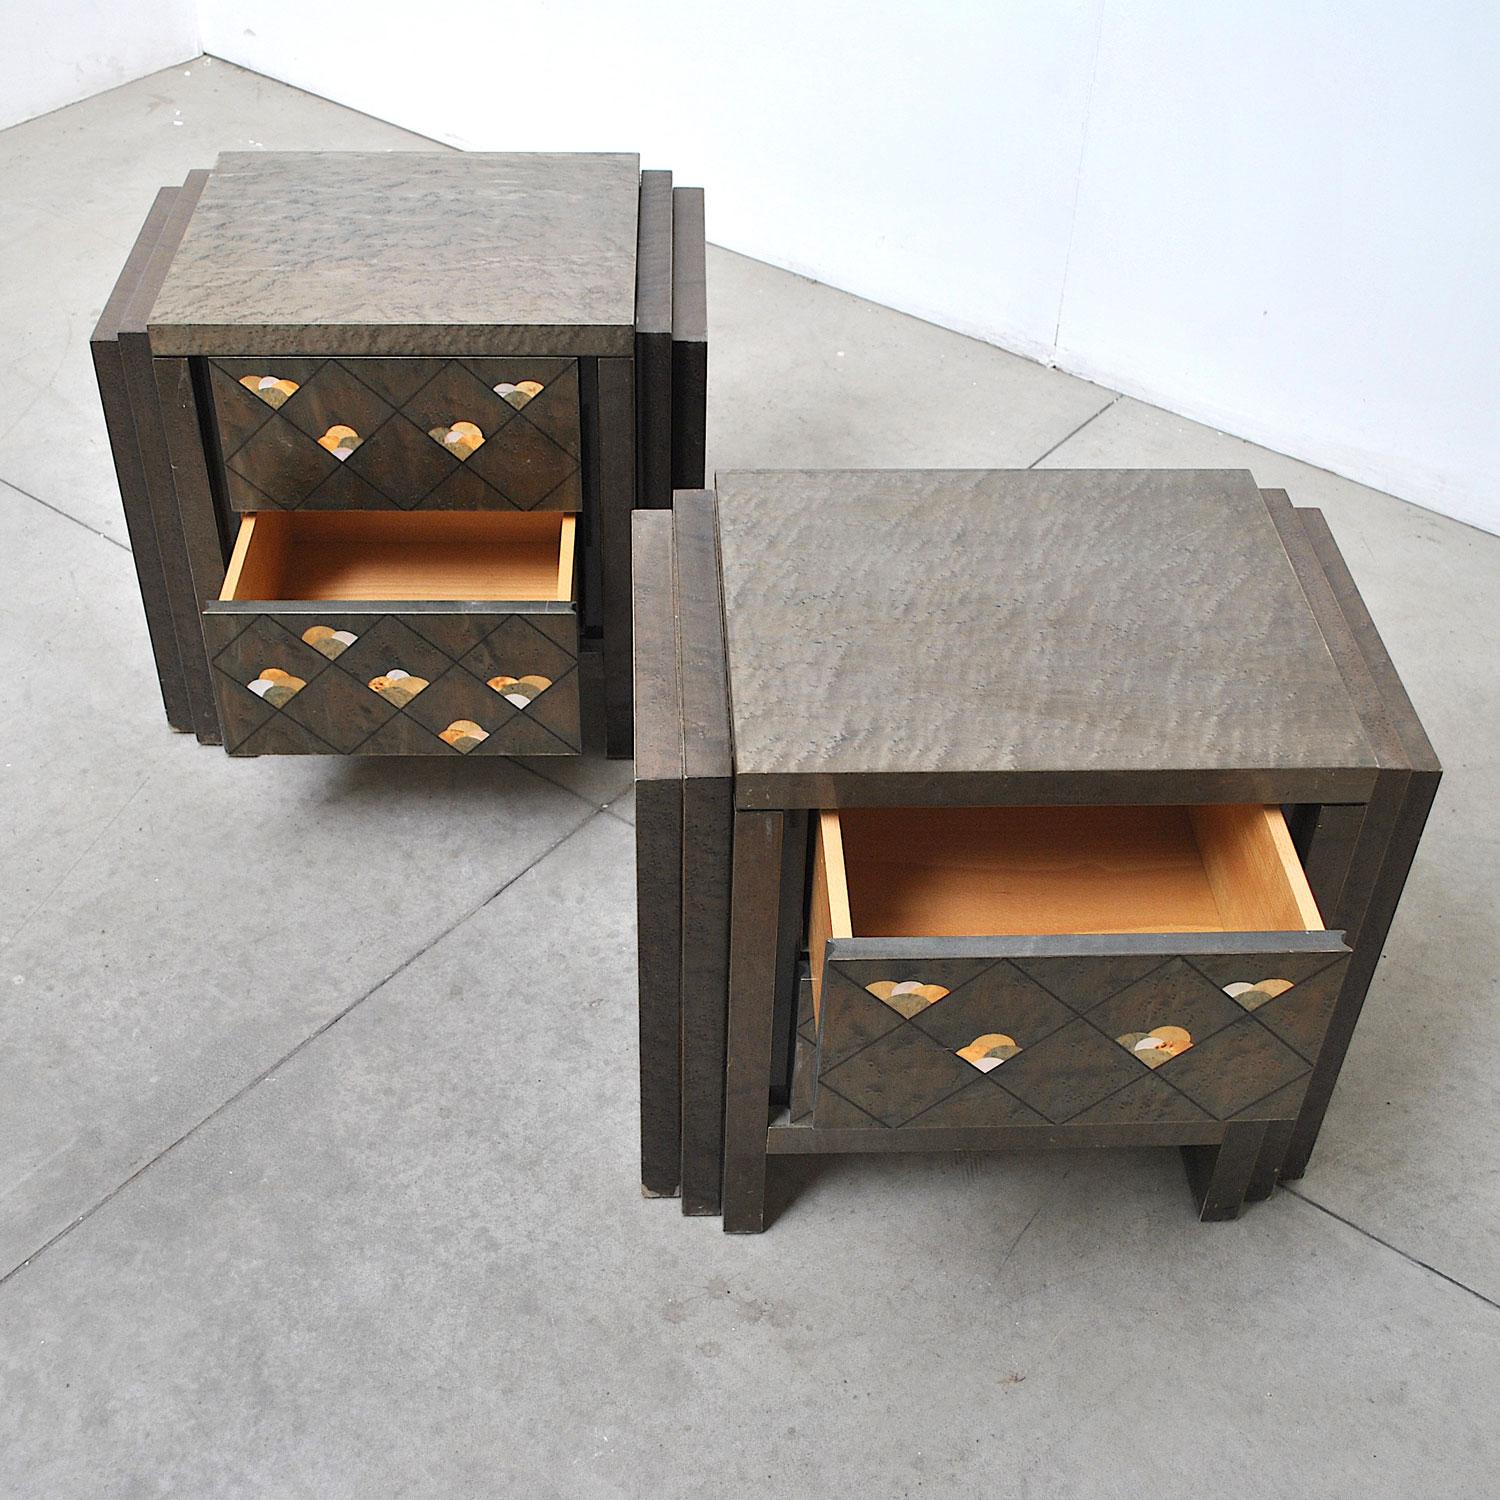 Luciano Frigerio Italian Midcentury Nightstands, Late 1970s For Sale 5